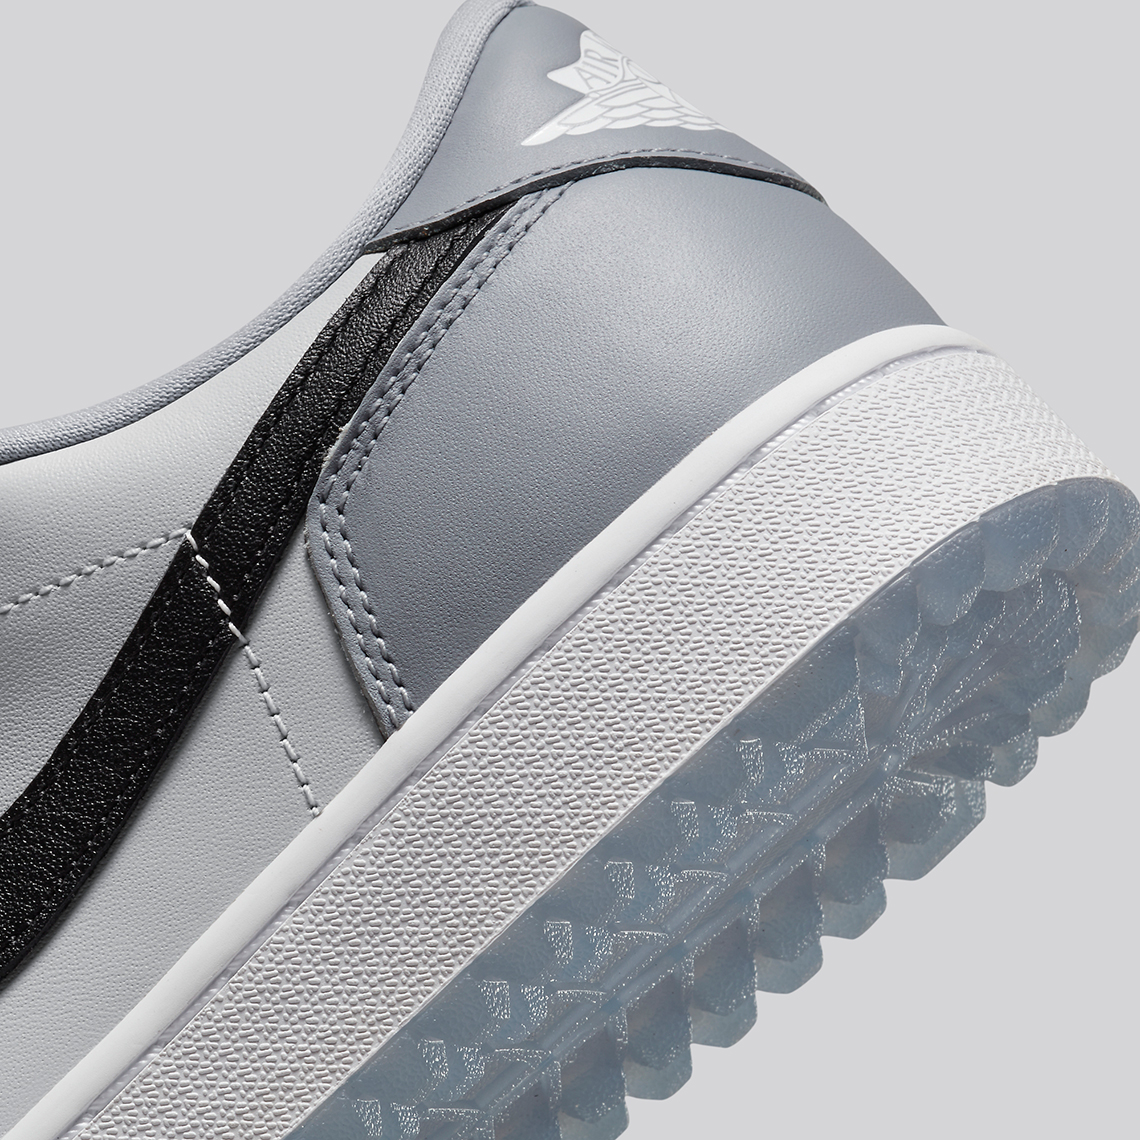 The Air jordan High 1 Elevate Low "Atmosphere" is a brand new women's Golf Wolf Grey Dd9315 002 7